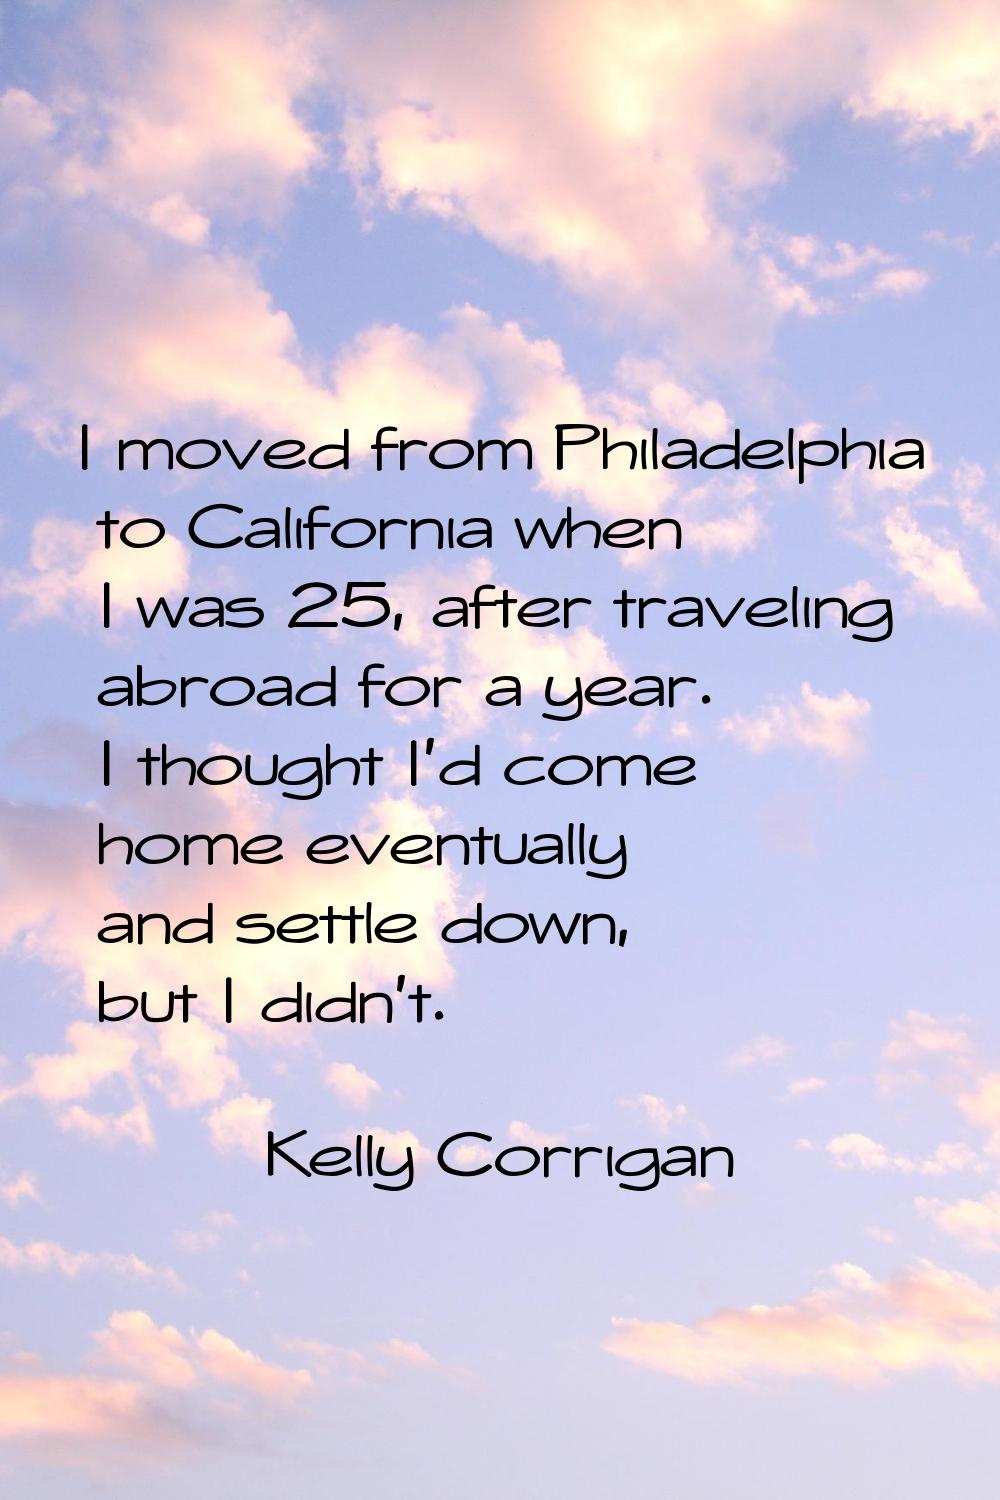 I moved from Philadelphia to California when I was 25, after traveling abroad for a year. I thought